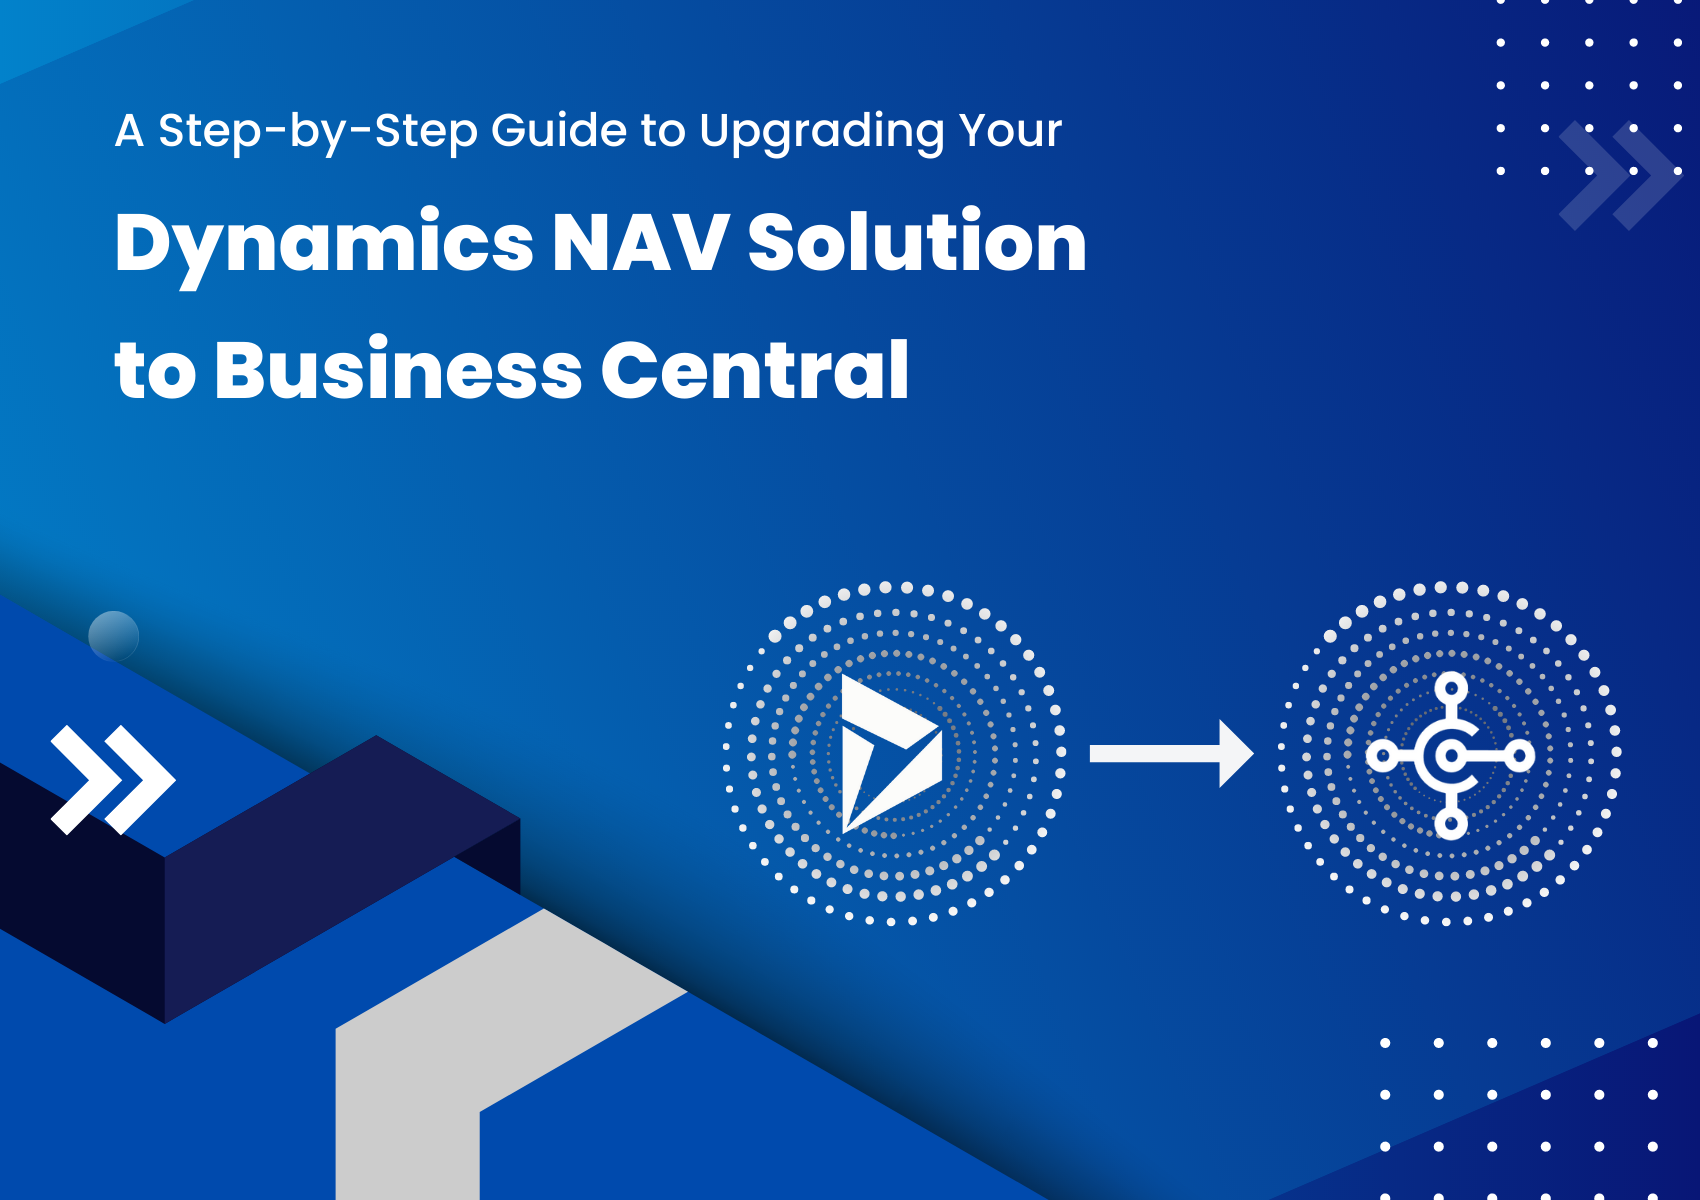 Upgrading Dynamics NAV to Business Central